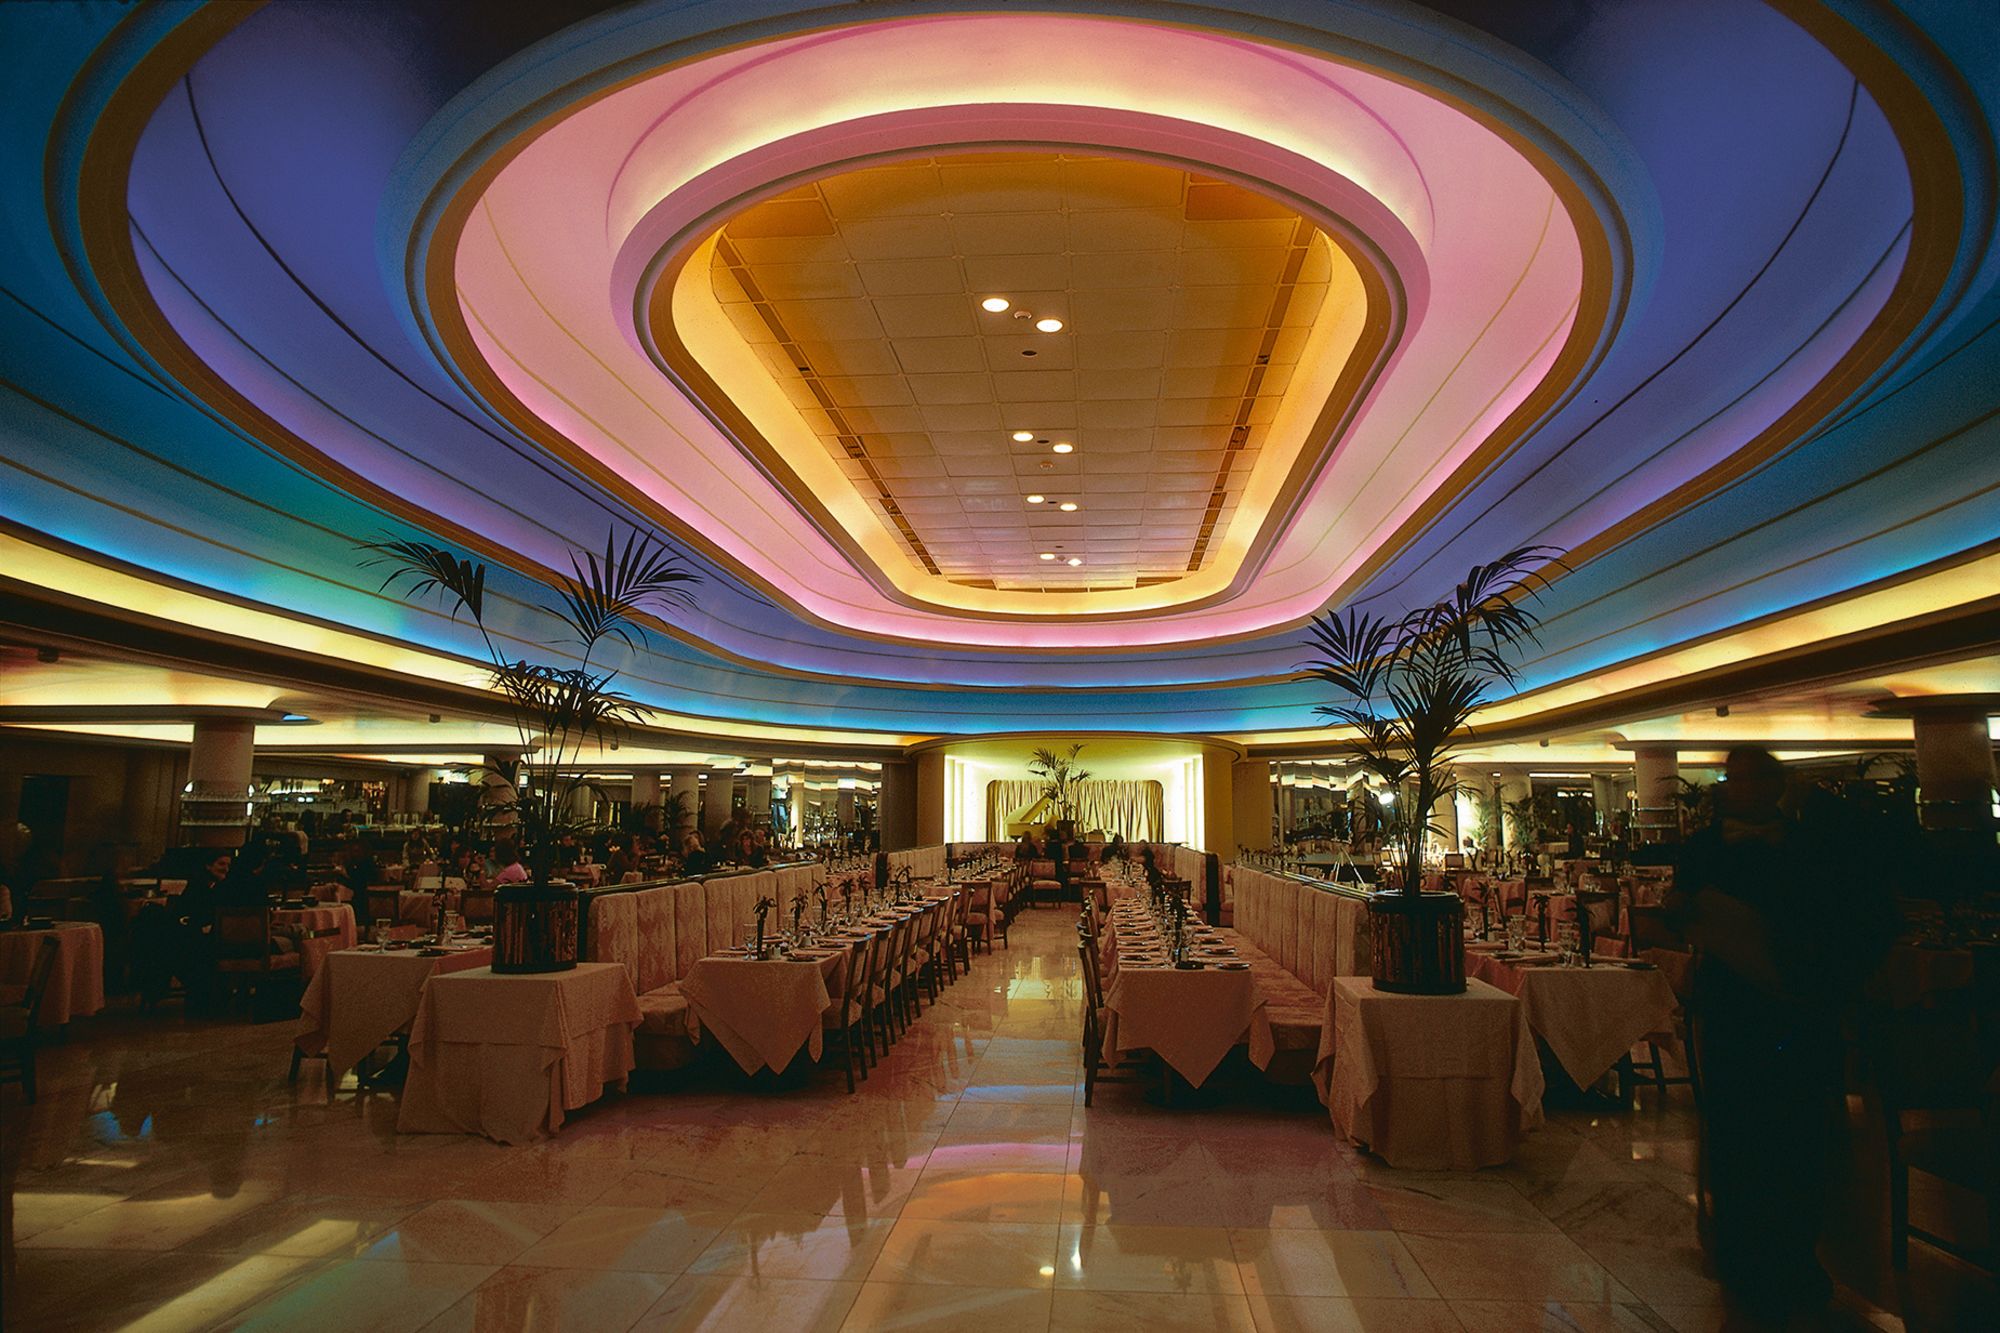 When Big Biba restored the 1930s restaurant the "Rainbow Room" within their Kensington building, it quickly became the place for celebrities and musicians to hang out.